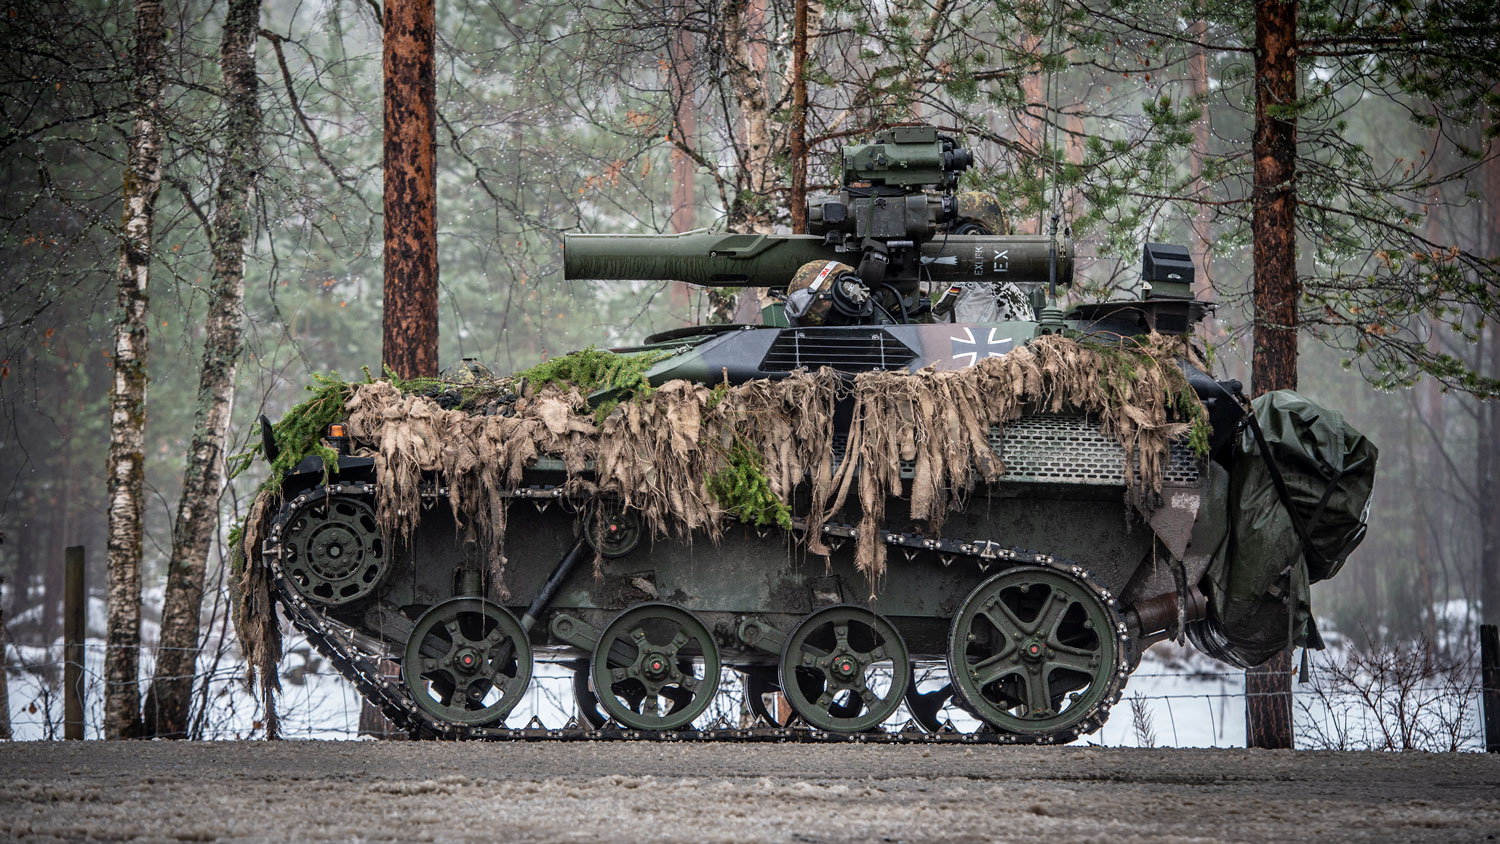 German-Wiesel-Armoured-Weapons-Carrier-AWC-fitted-with-a-BGM-71-TOW-anti-tank-missile-launcher-on-Exercise-TRIDENT-JUNCTURE-2018-Image-ID-45166226-CREDIT-Crown-Copyright.jpg